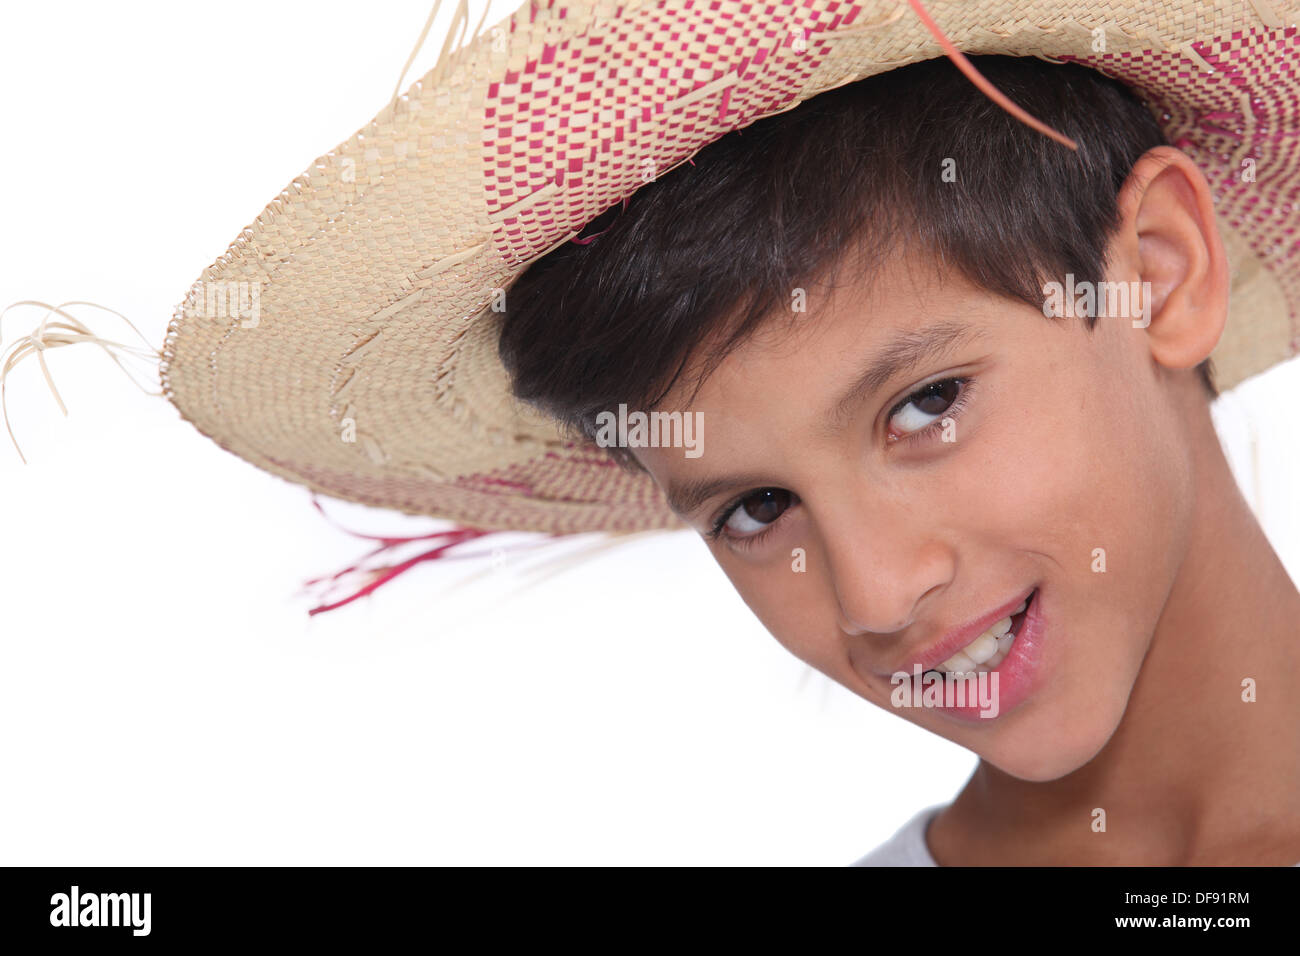 Portrait of child wearing a hat Stock Photo